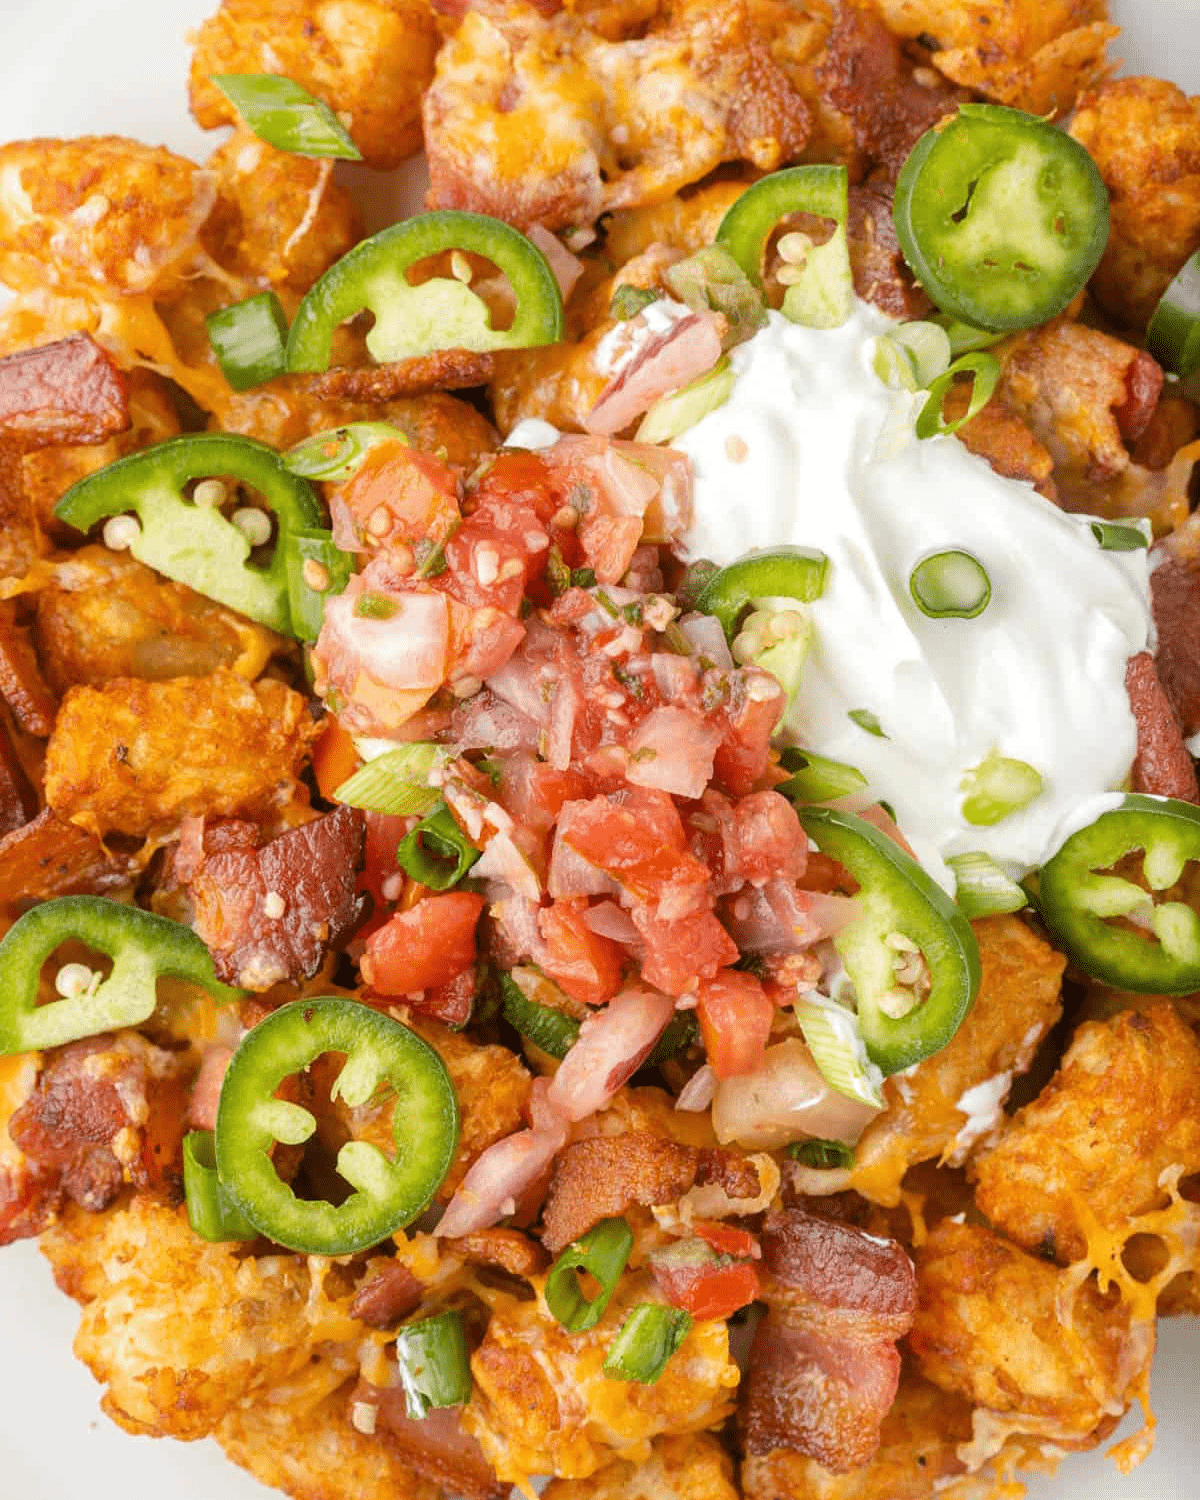 Tater tots with cheese and jalapeno peppers